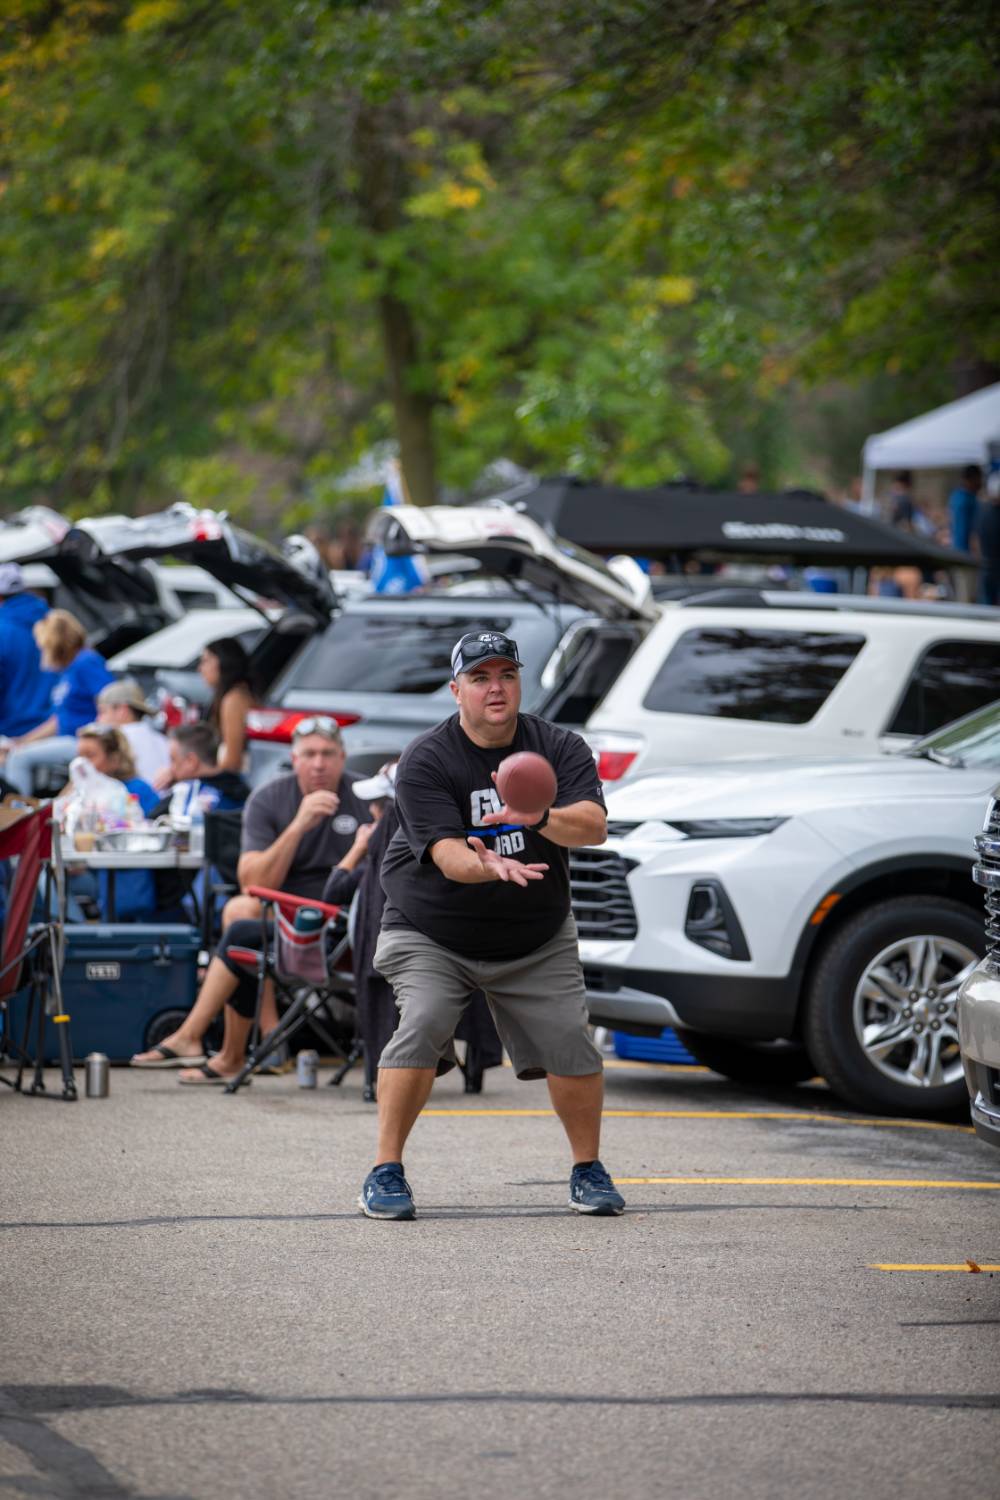 Attendee catches football in parking lot during Family Day tailgate.